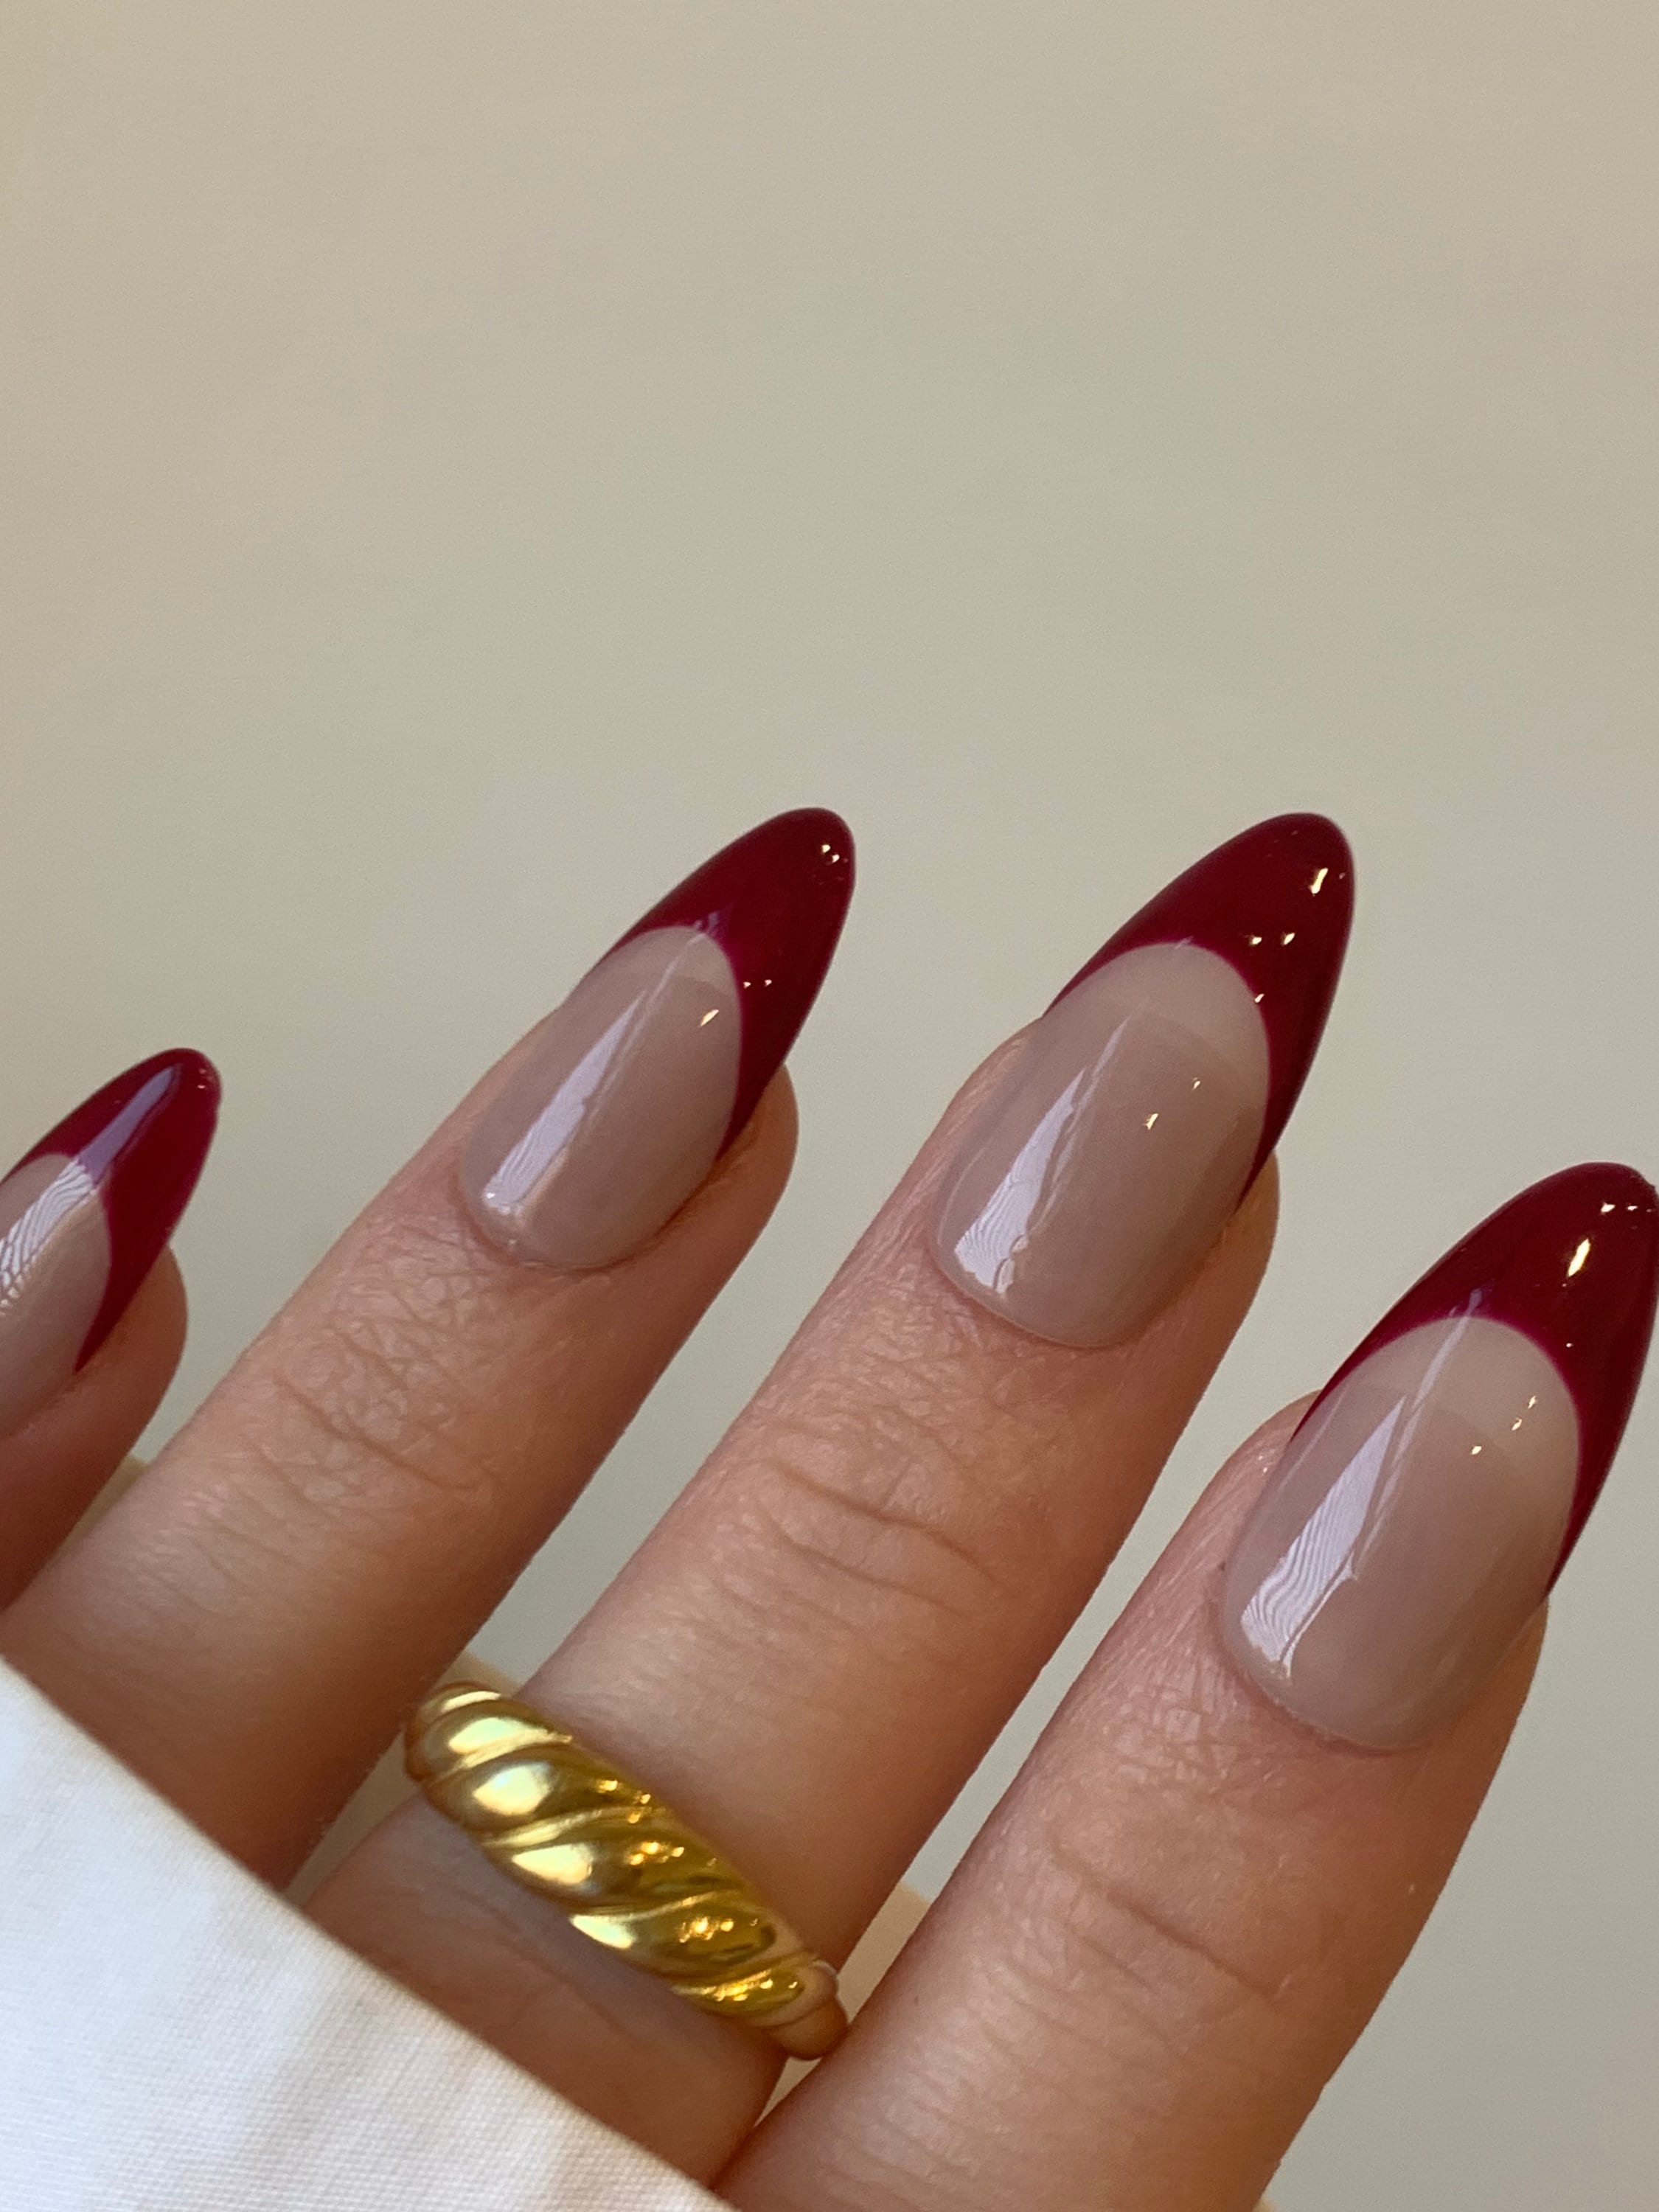 CND - Creative Nail Design - Who else loves a colorful French manicure as a  fun way to spice up your #winternails? Shades: Devil Red, Glitter Sneakers  📷: @alfa.romero24 | Facebook